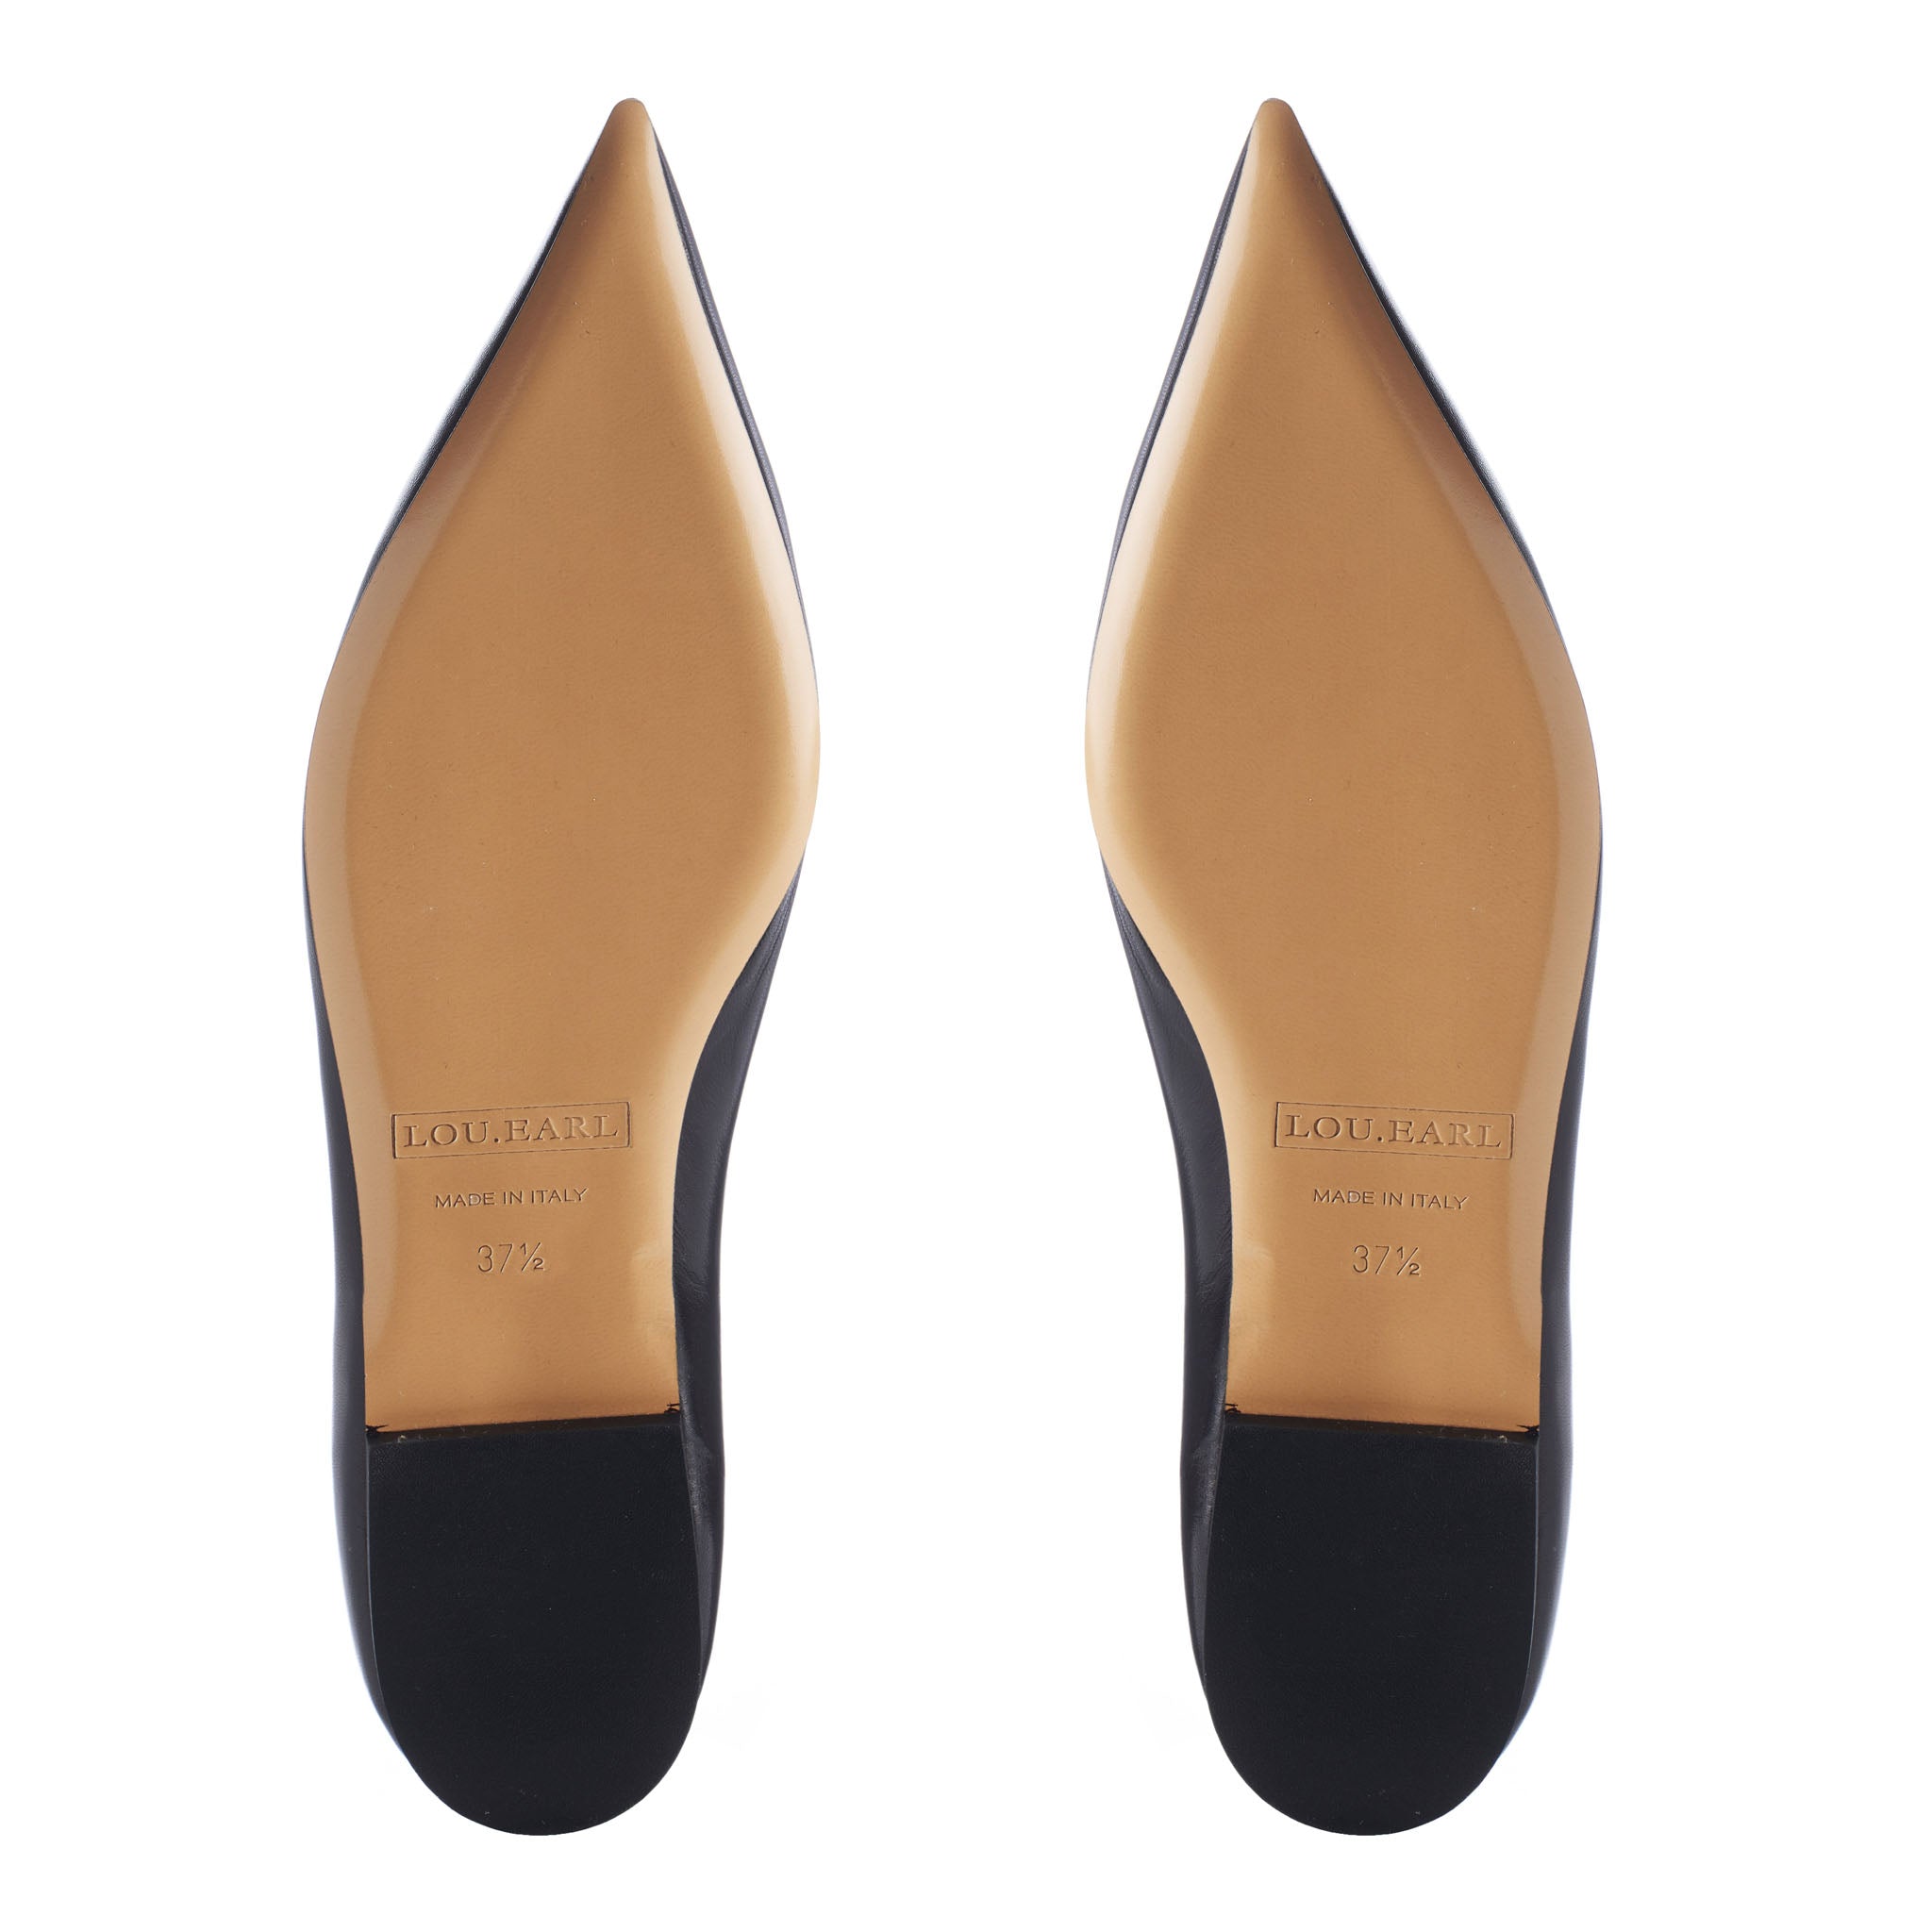 a pair of womens flat shoes showing outsole with sharp point toe shape and black heel.